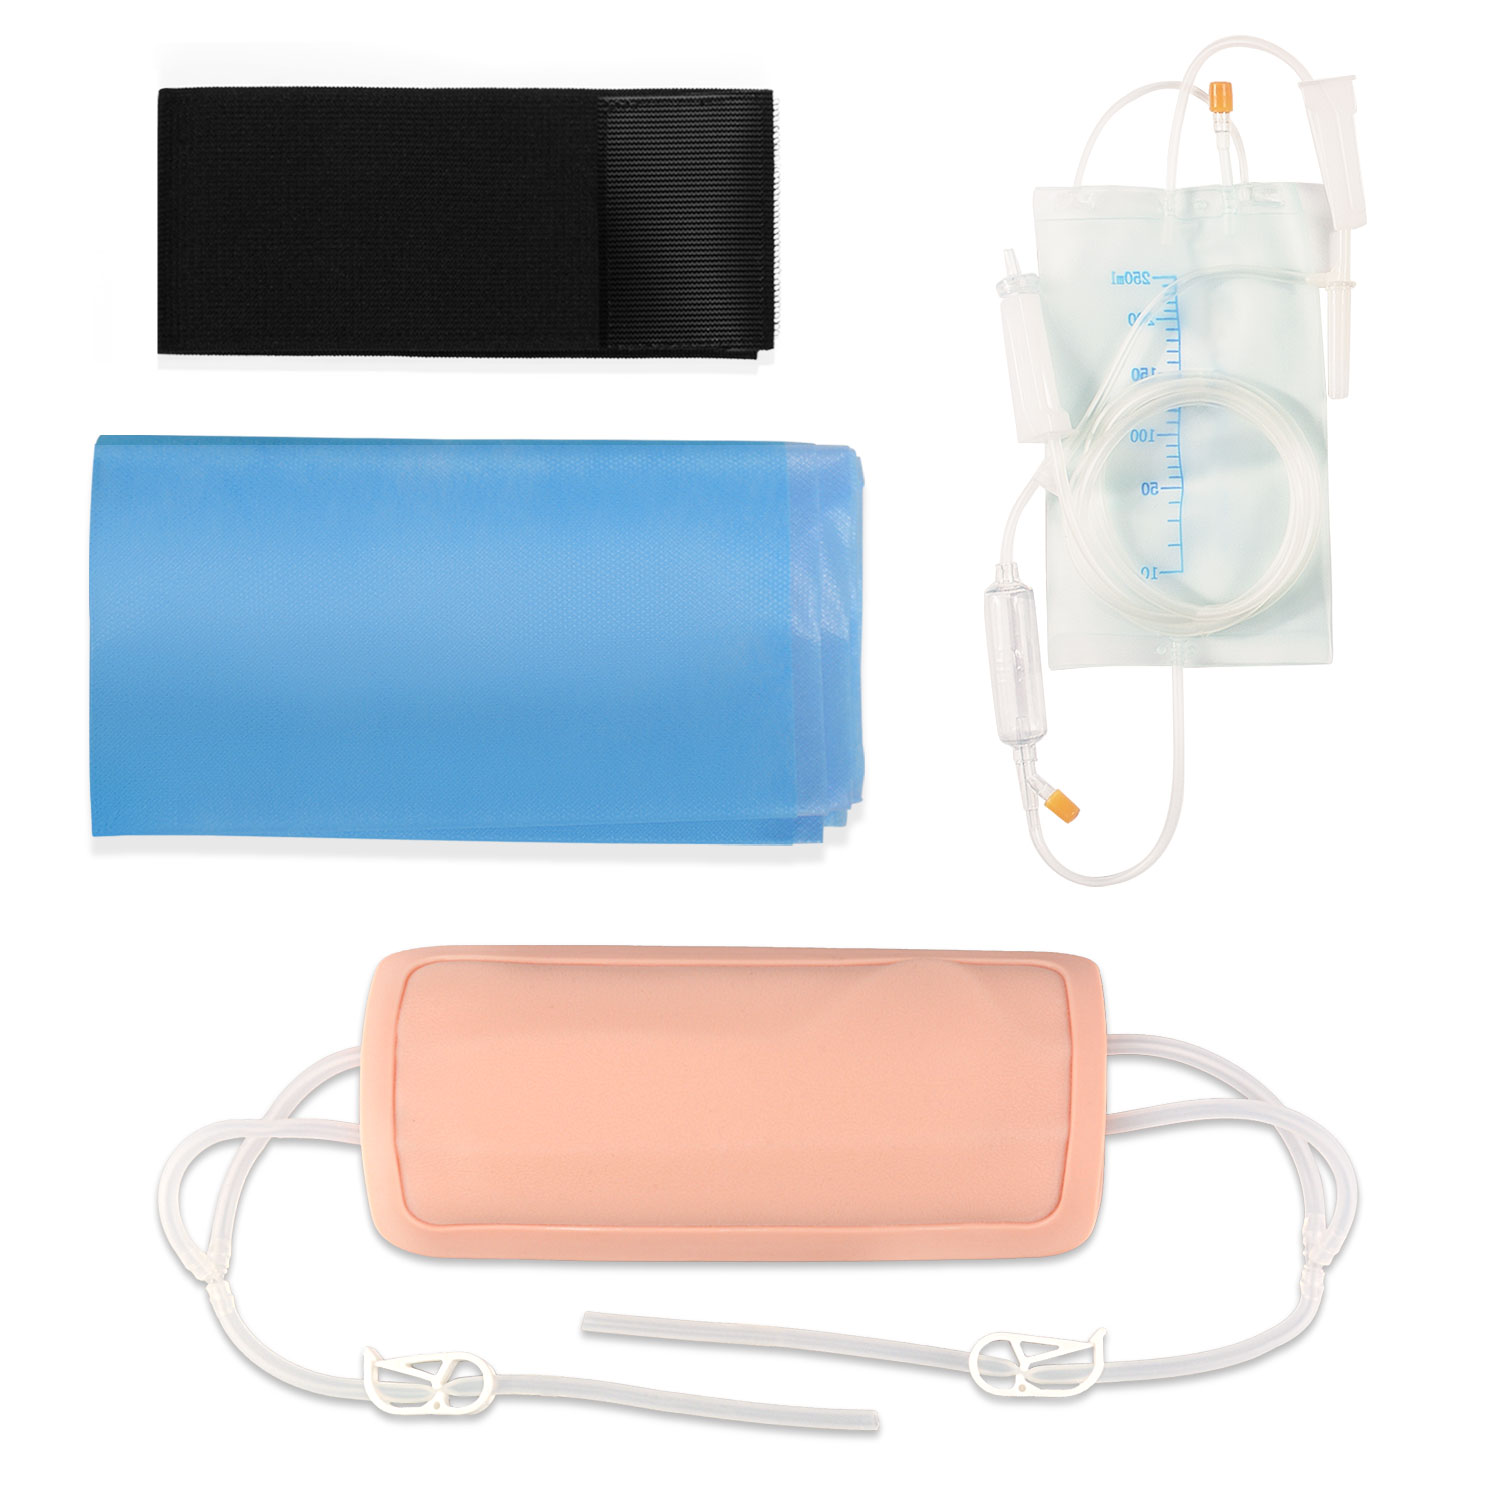 Wearable venipuncture IV practice simulation pad and kit